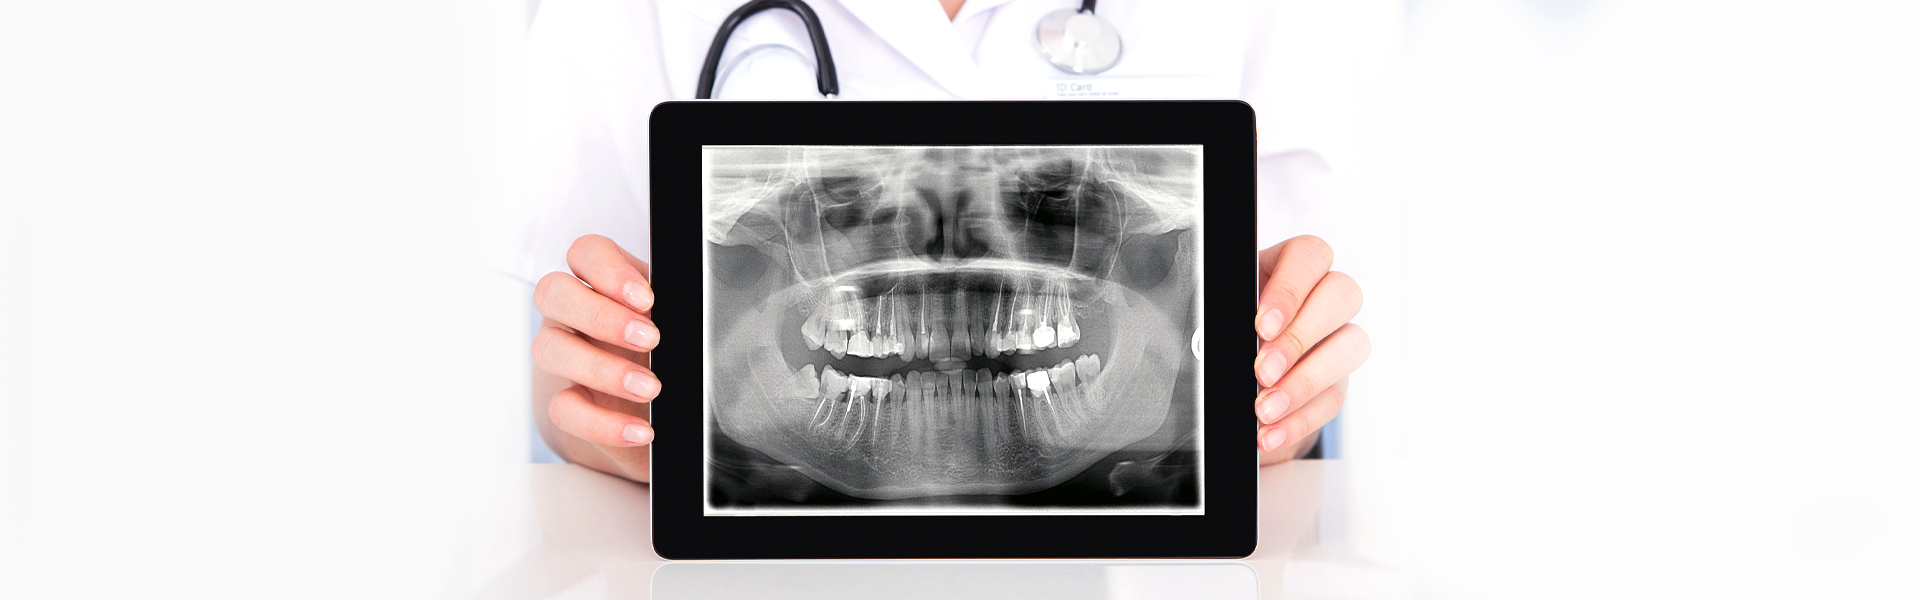 The Advantage of Digital X-Rays Medical Professionals Need to Be Aware of